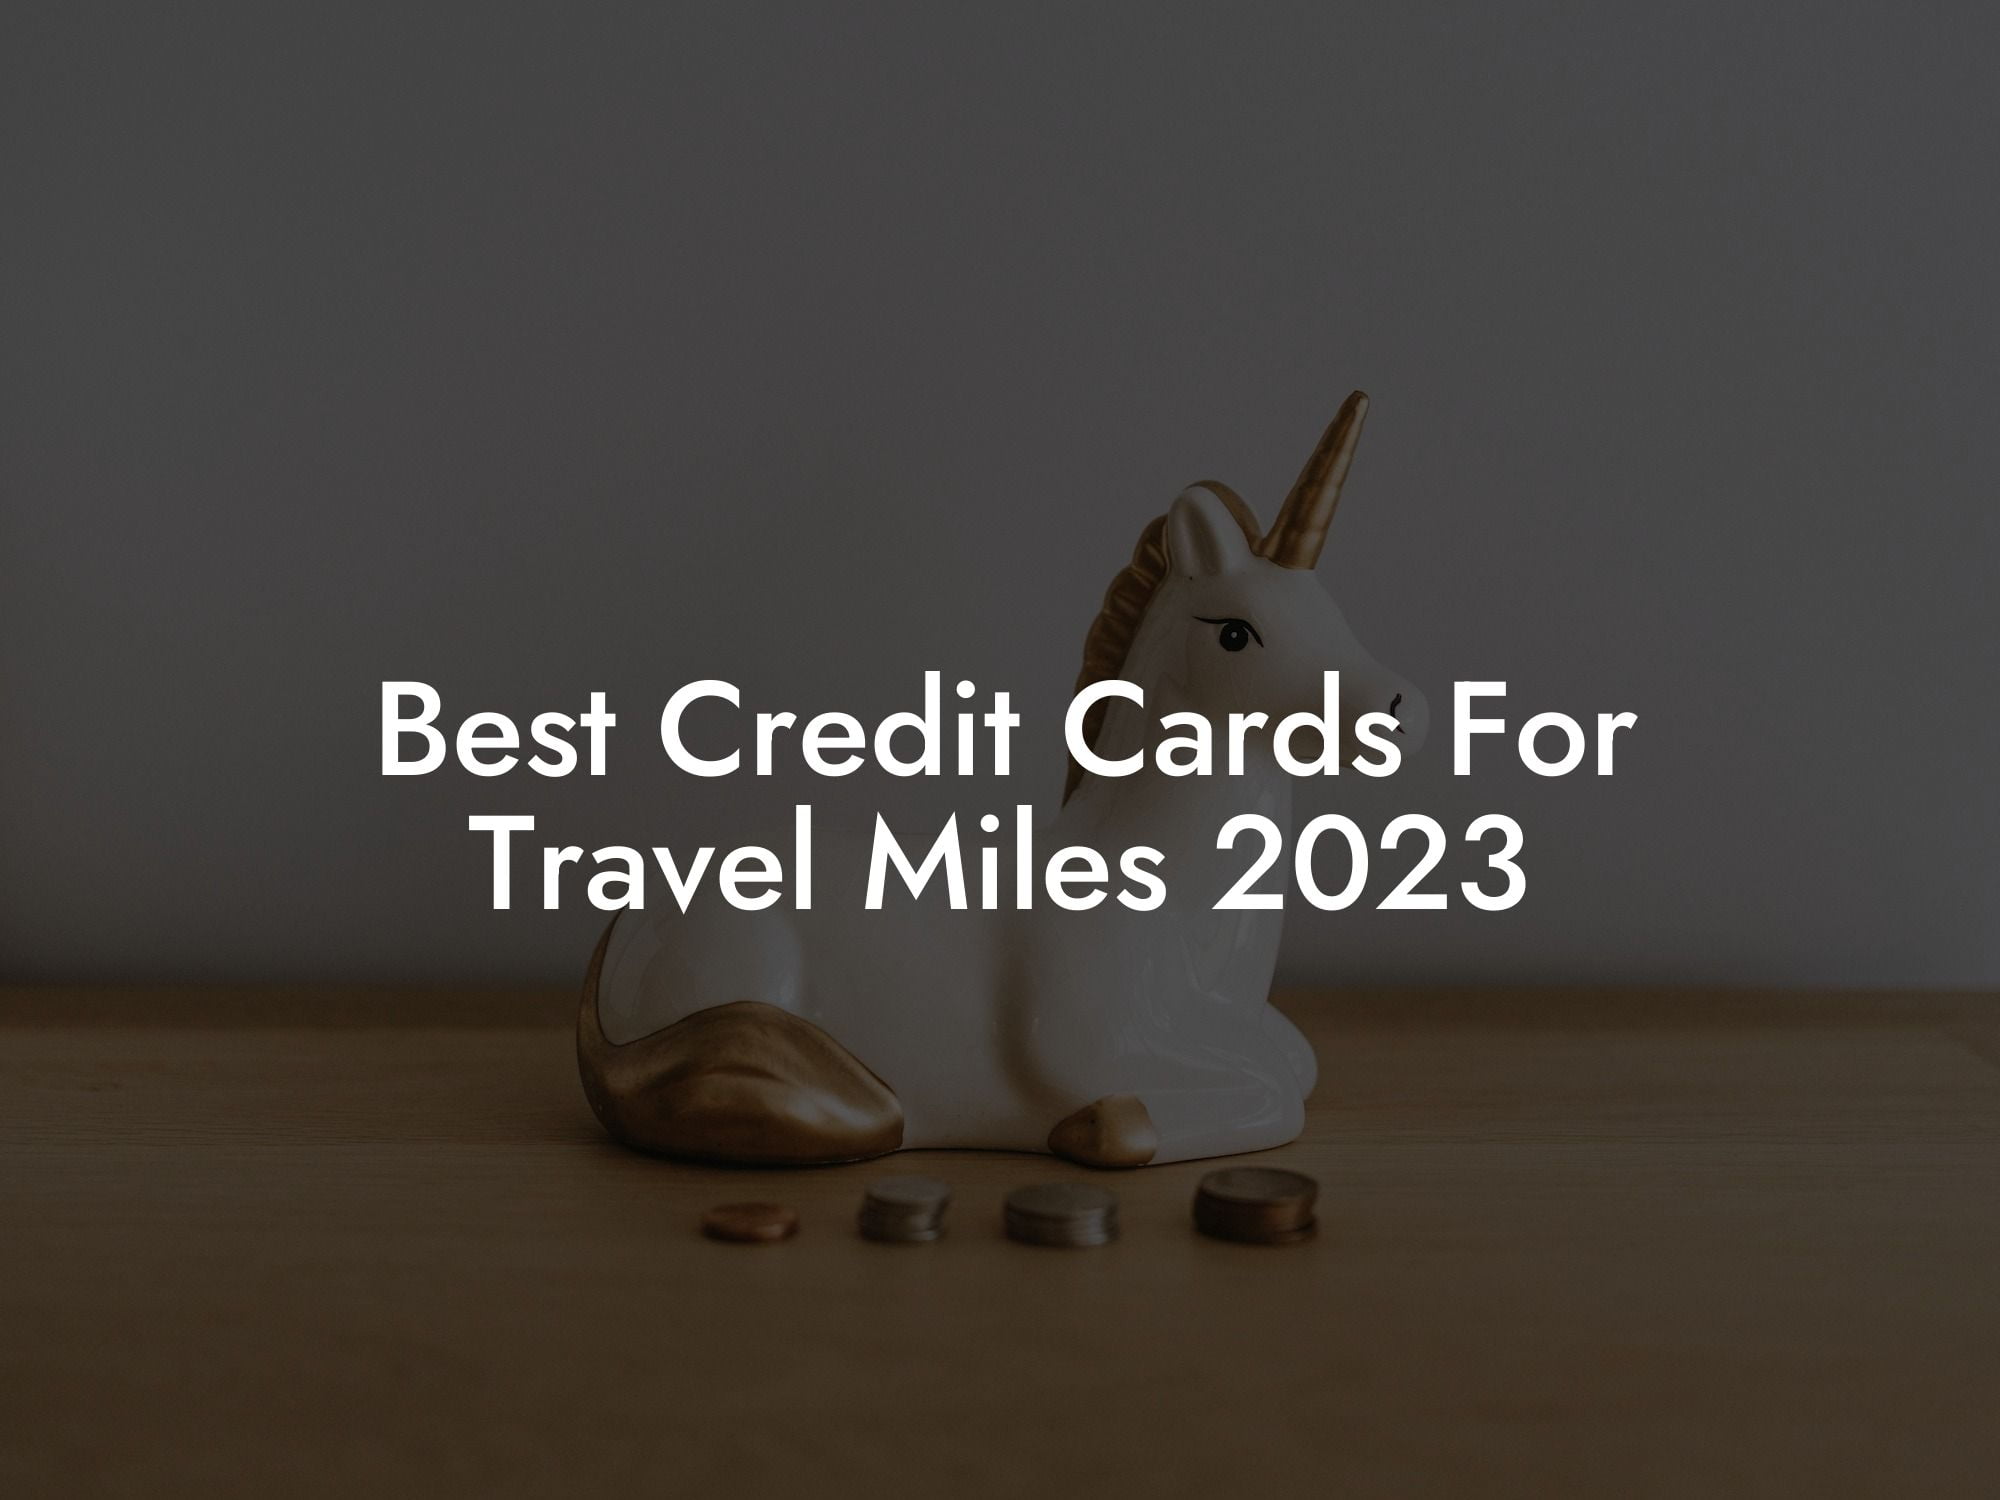 Best Credit Cards For Travel Miles 2023